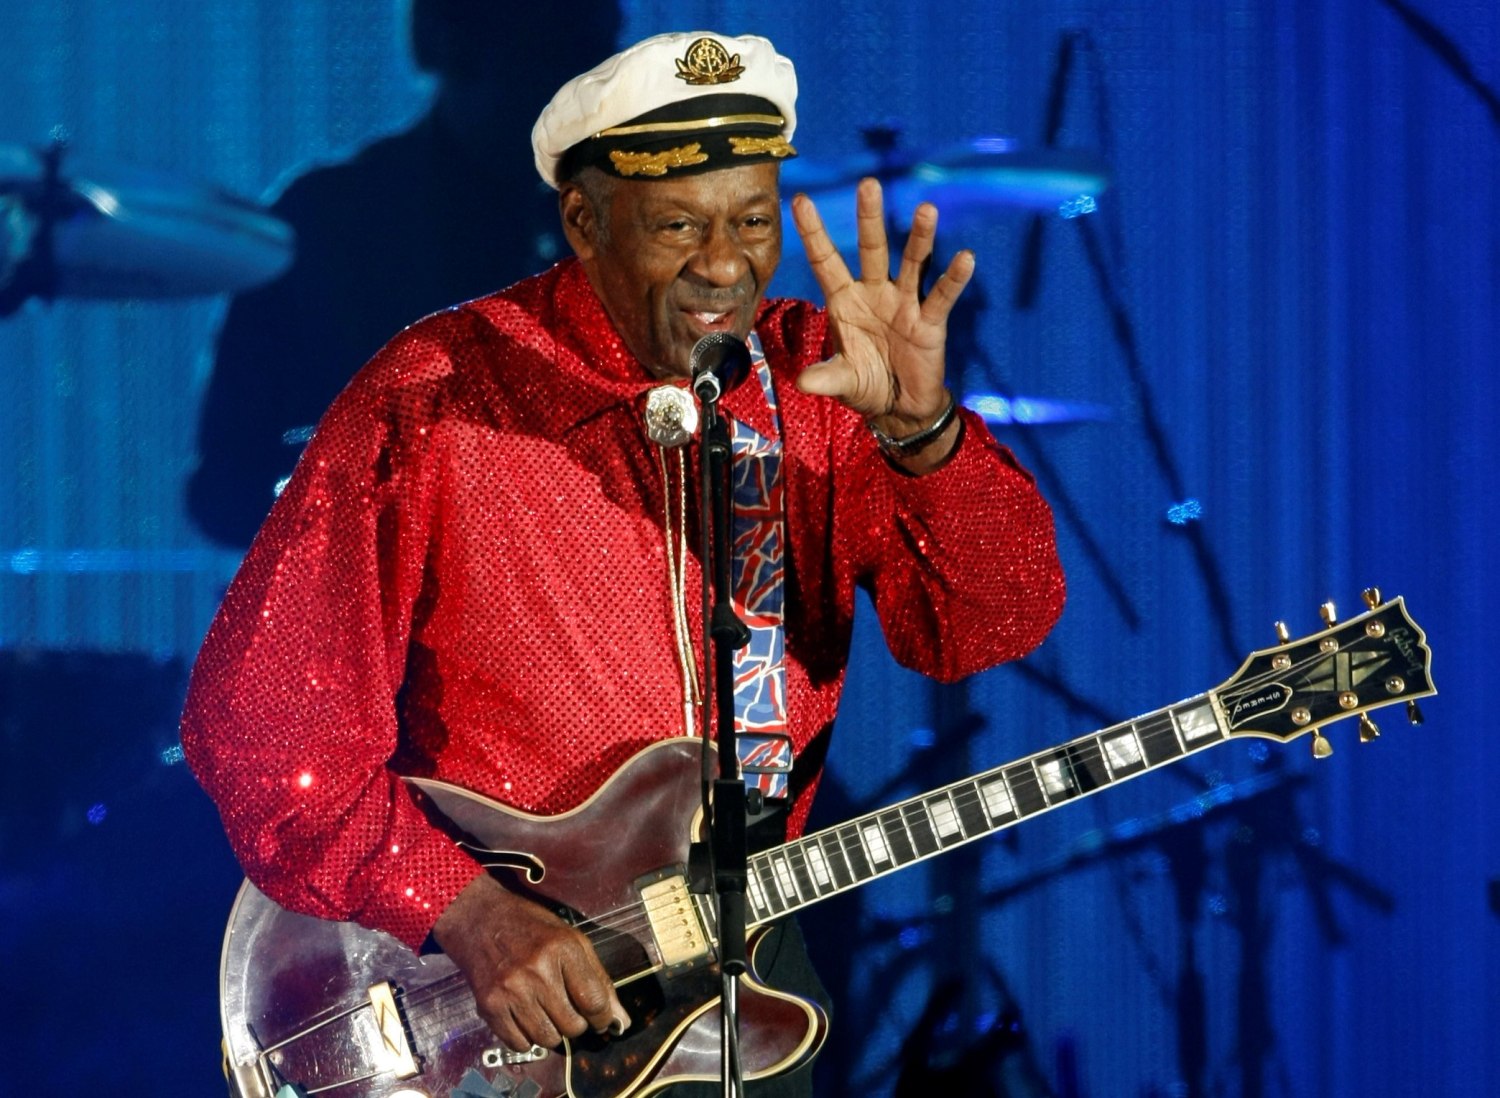 Chuck Berry, Father Of Rock 'N' Roll, Dies At 90